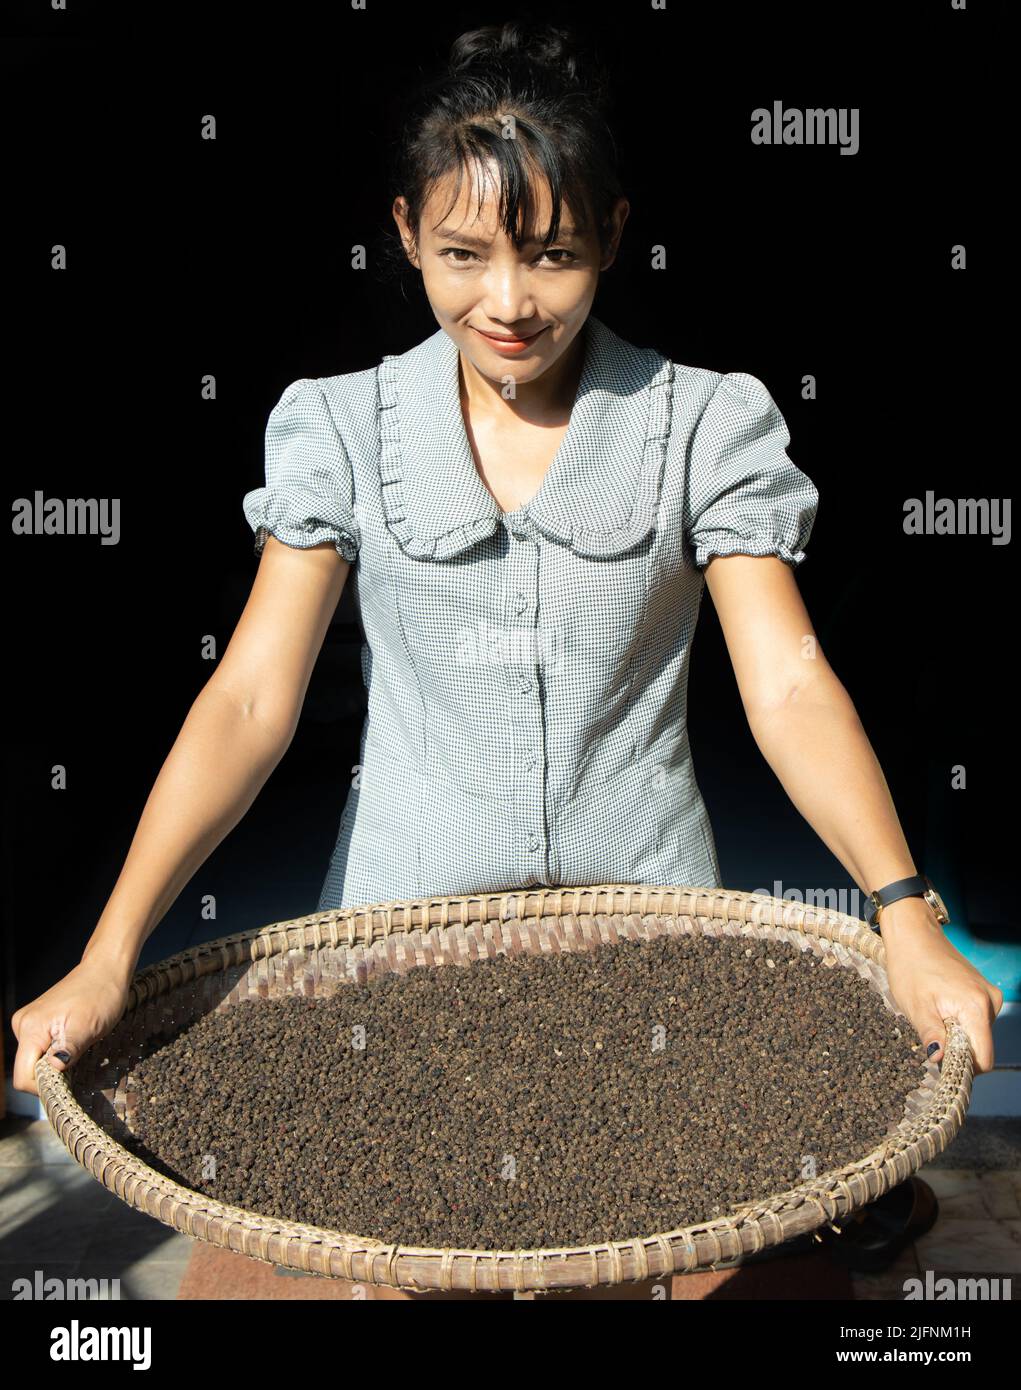 Young woman holding a tray with dried black pepper Stock Photo